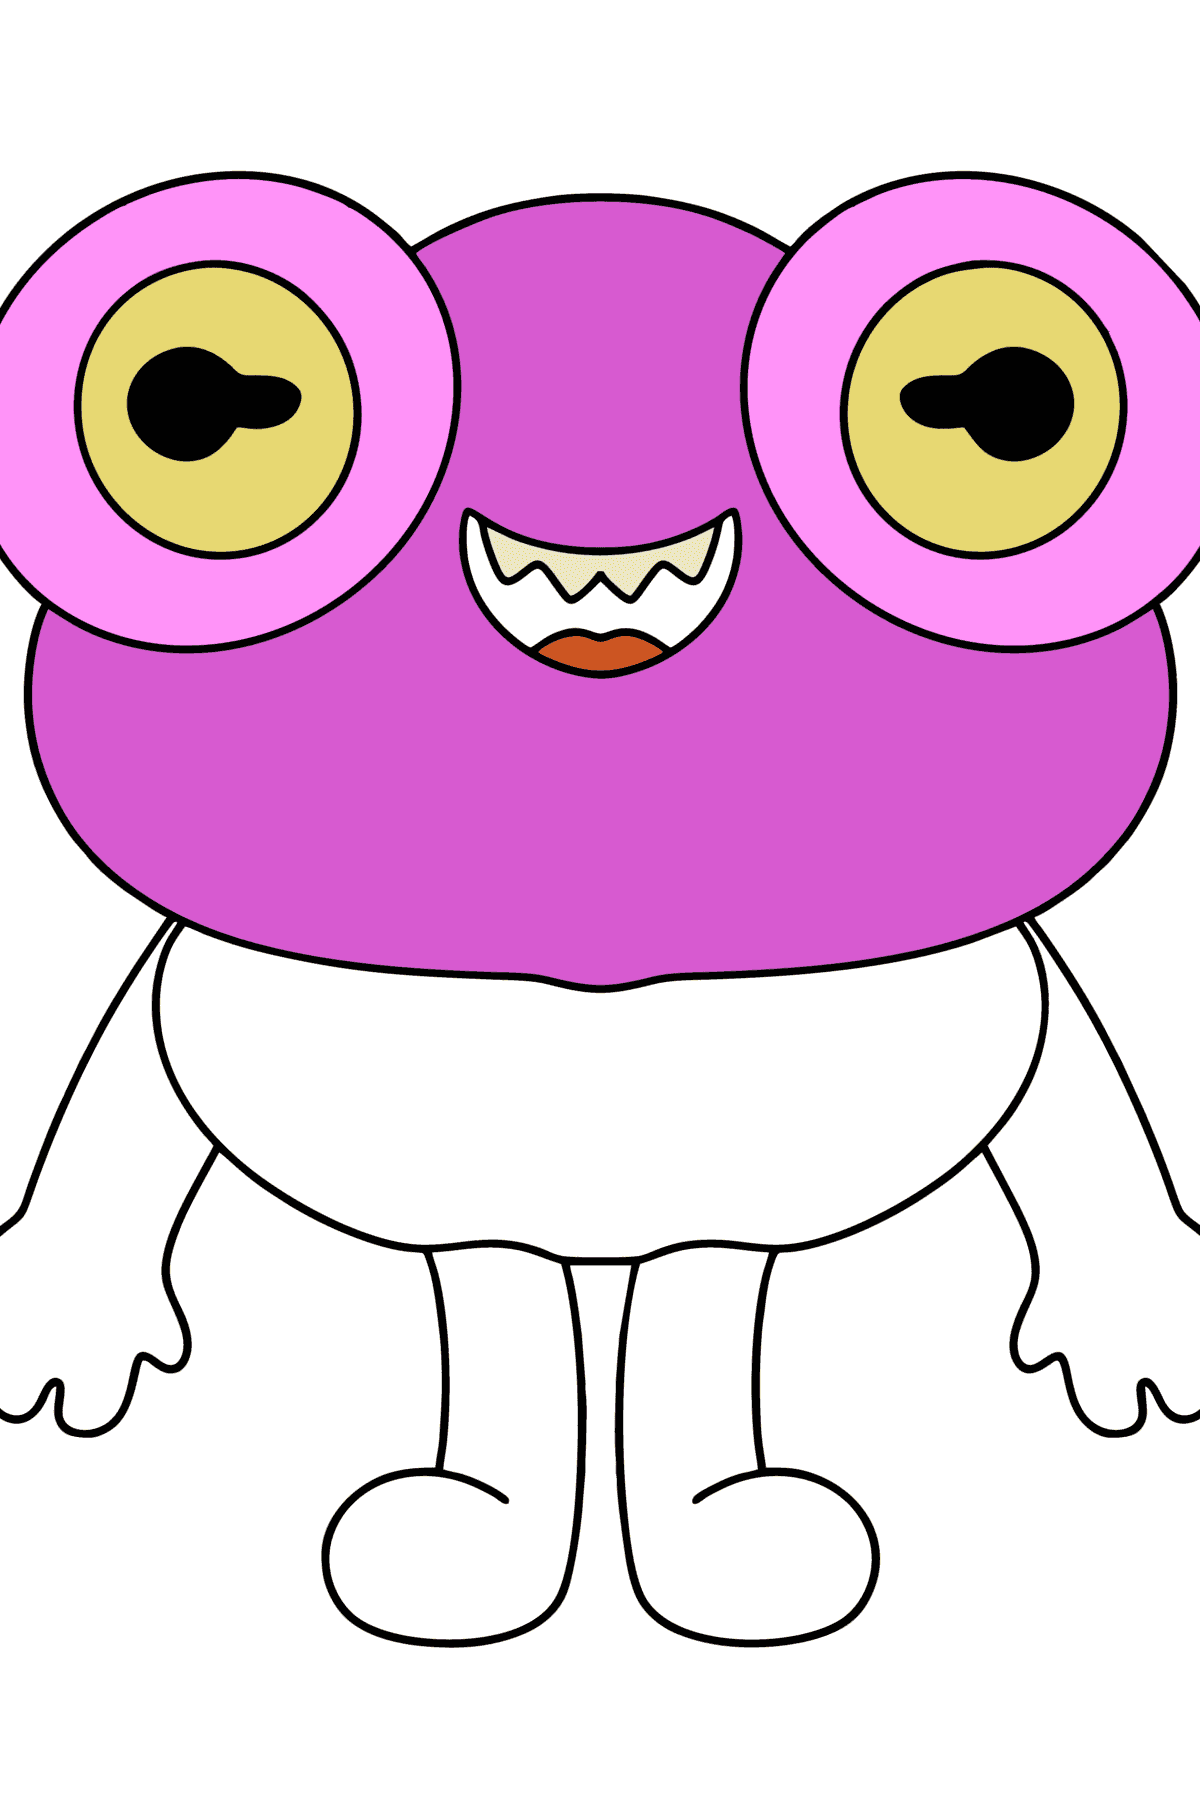 Coloring page Tocaboca heroes 04 - Coloring Pages for Kids